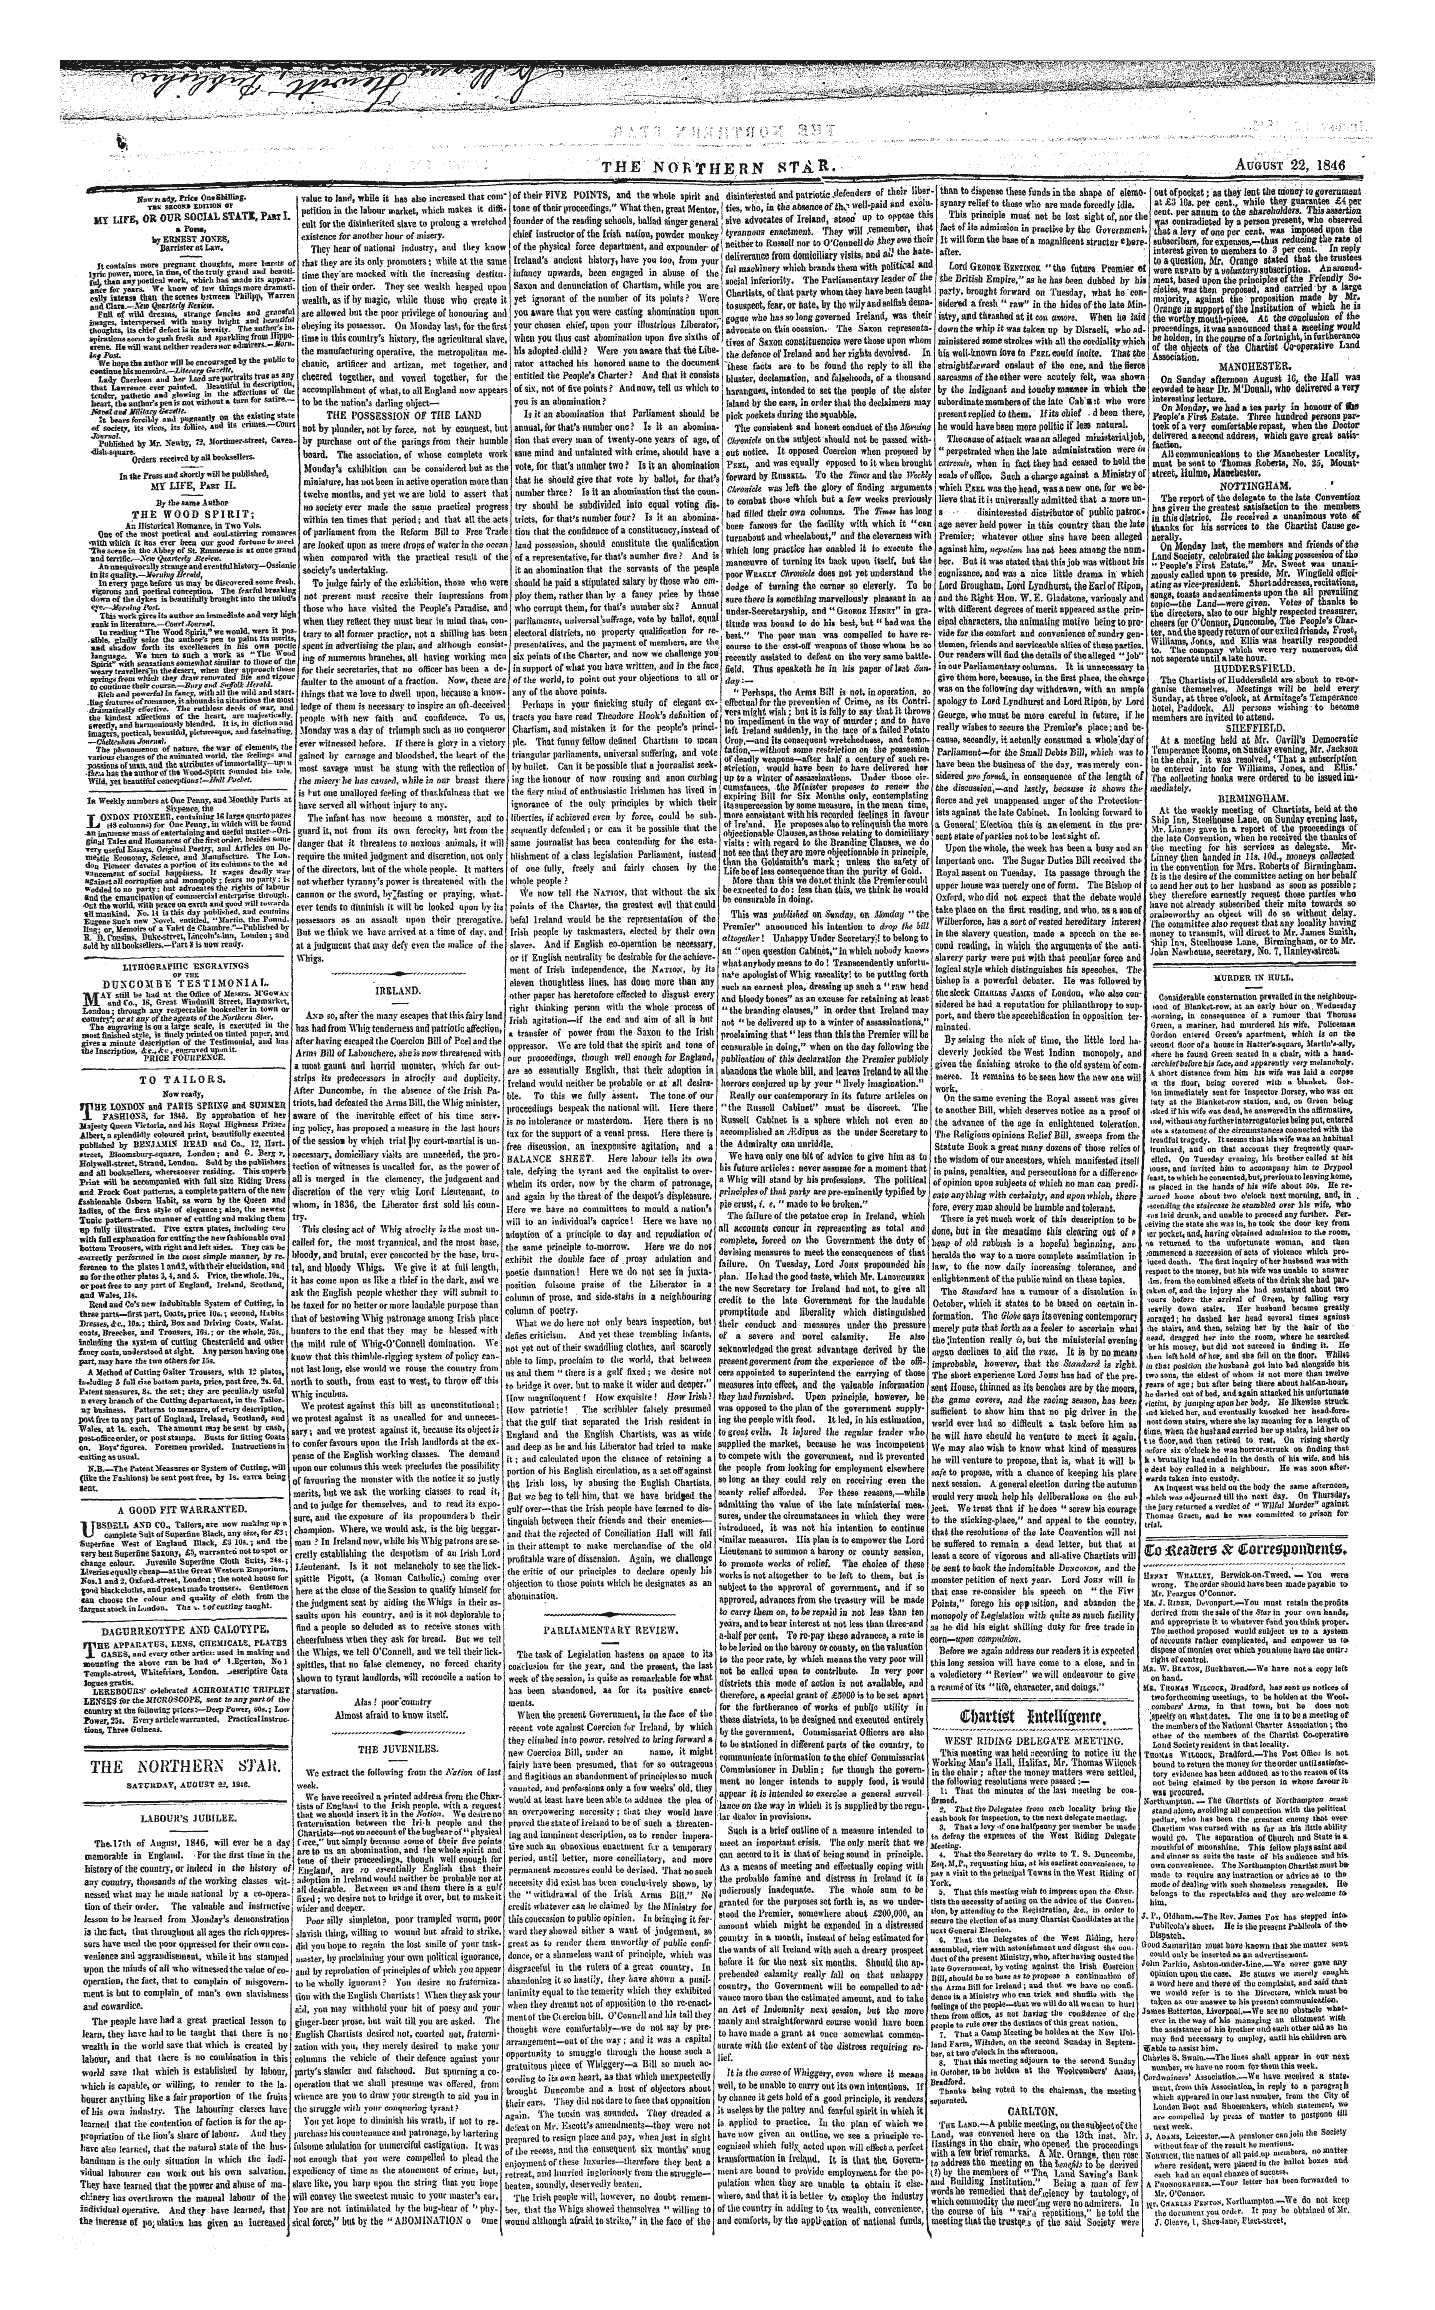 Northern Star (1837-1852): jS F Y, 1st edition - The Northern Star. Satckday, August 23. 184e.